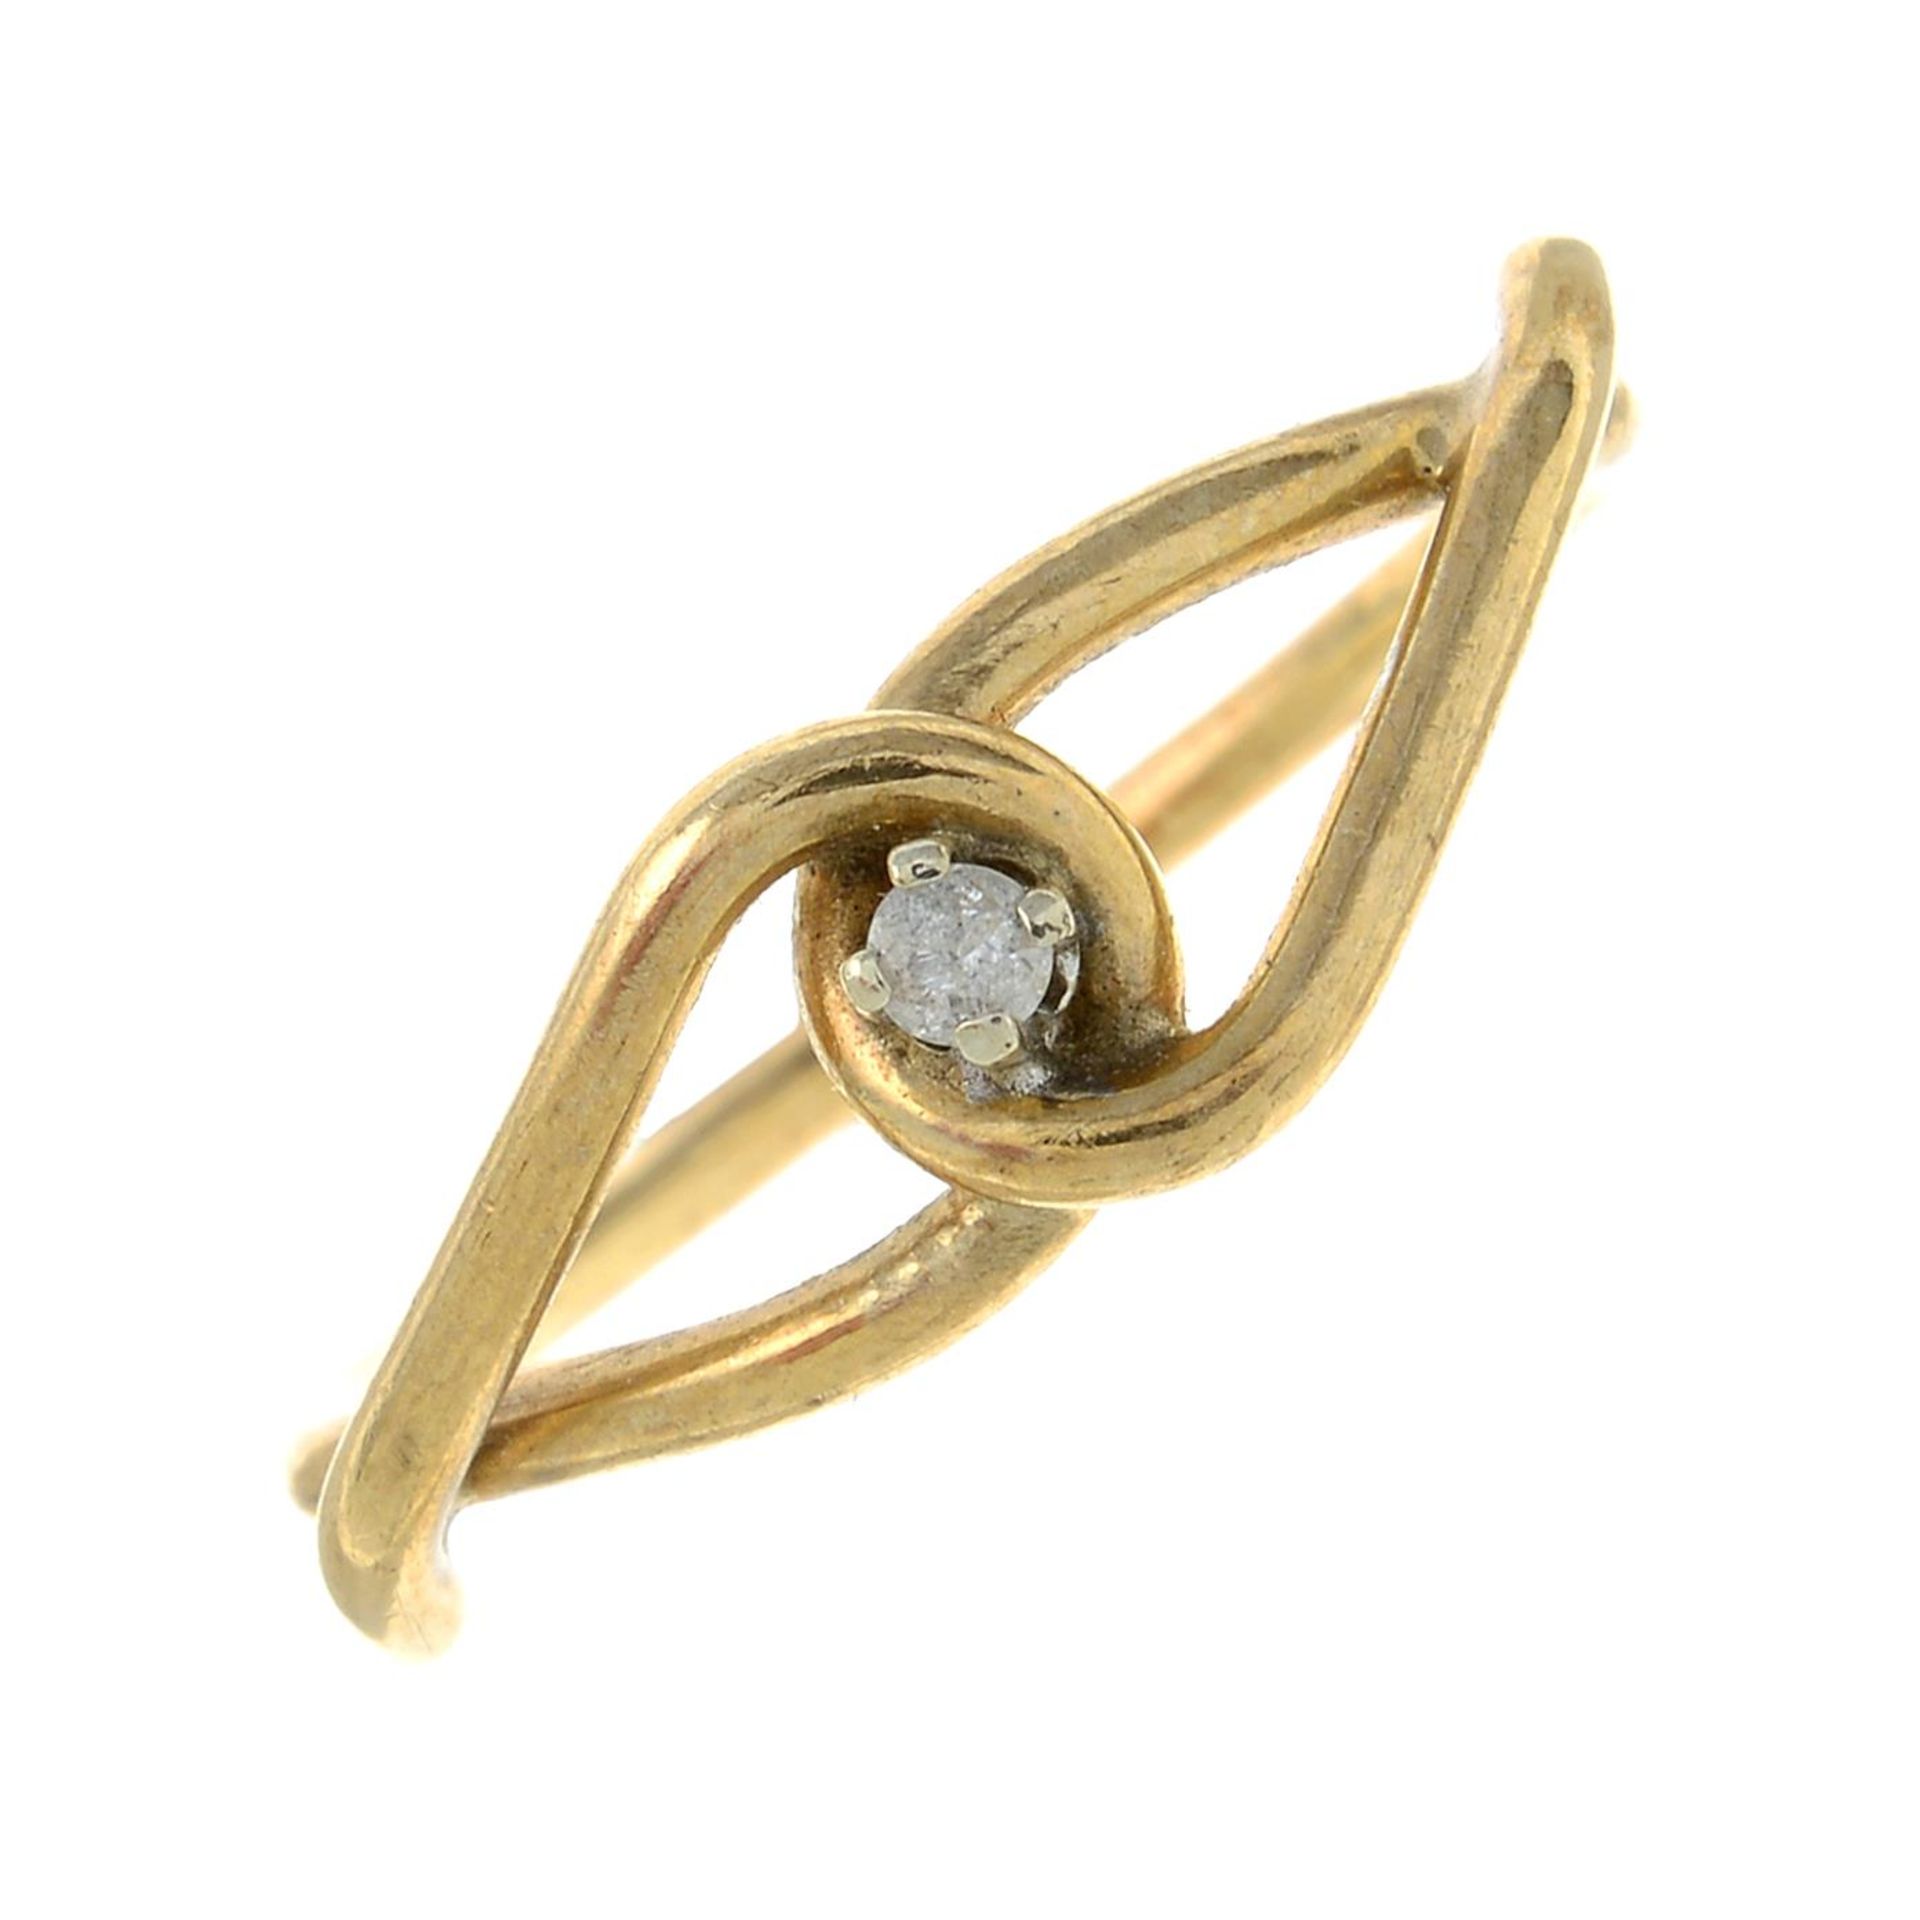 A 9ct gold diamond ring, with openwork shoulders.Hallmarks for 9ct gold.